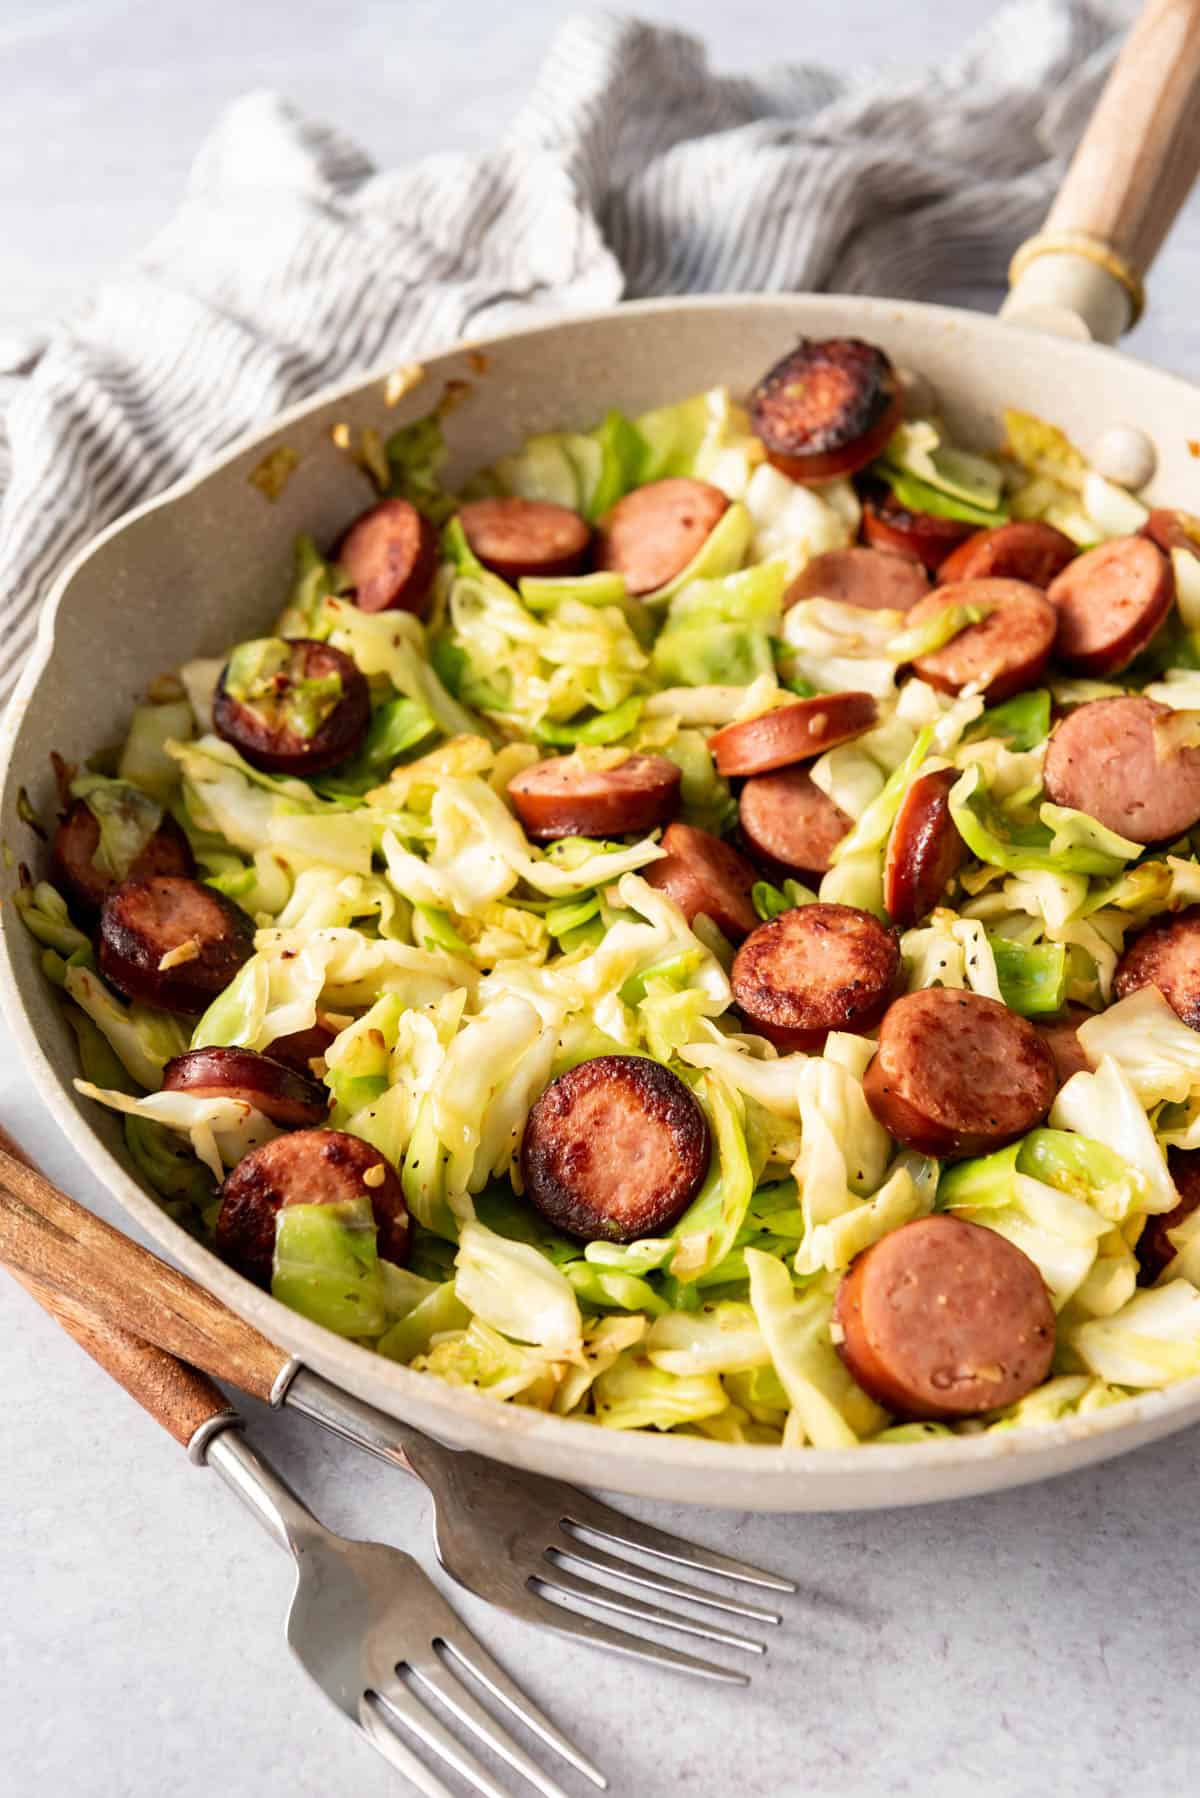 A one-pot cabbage and sausage dinner in a skillet.